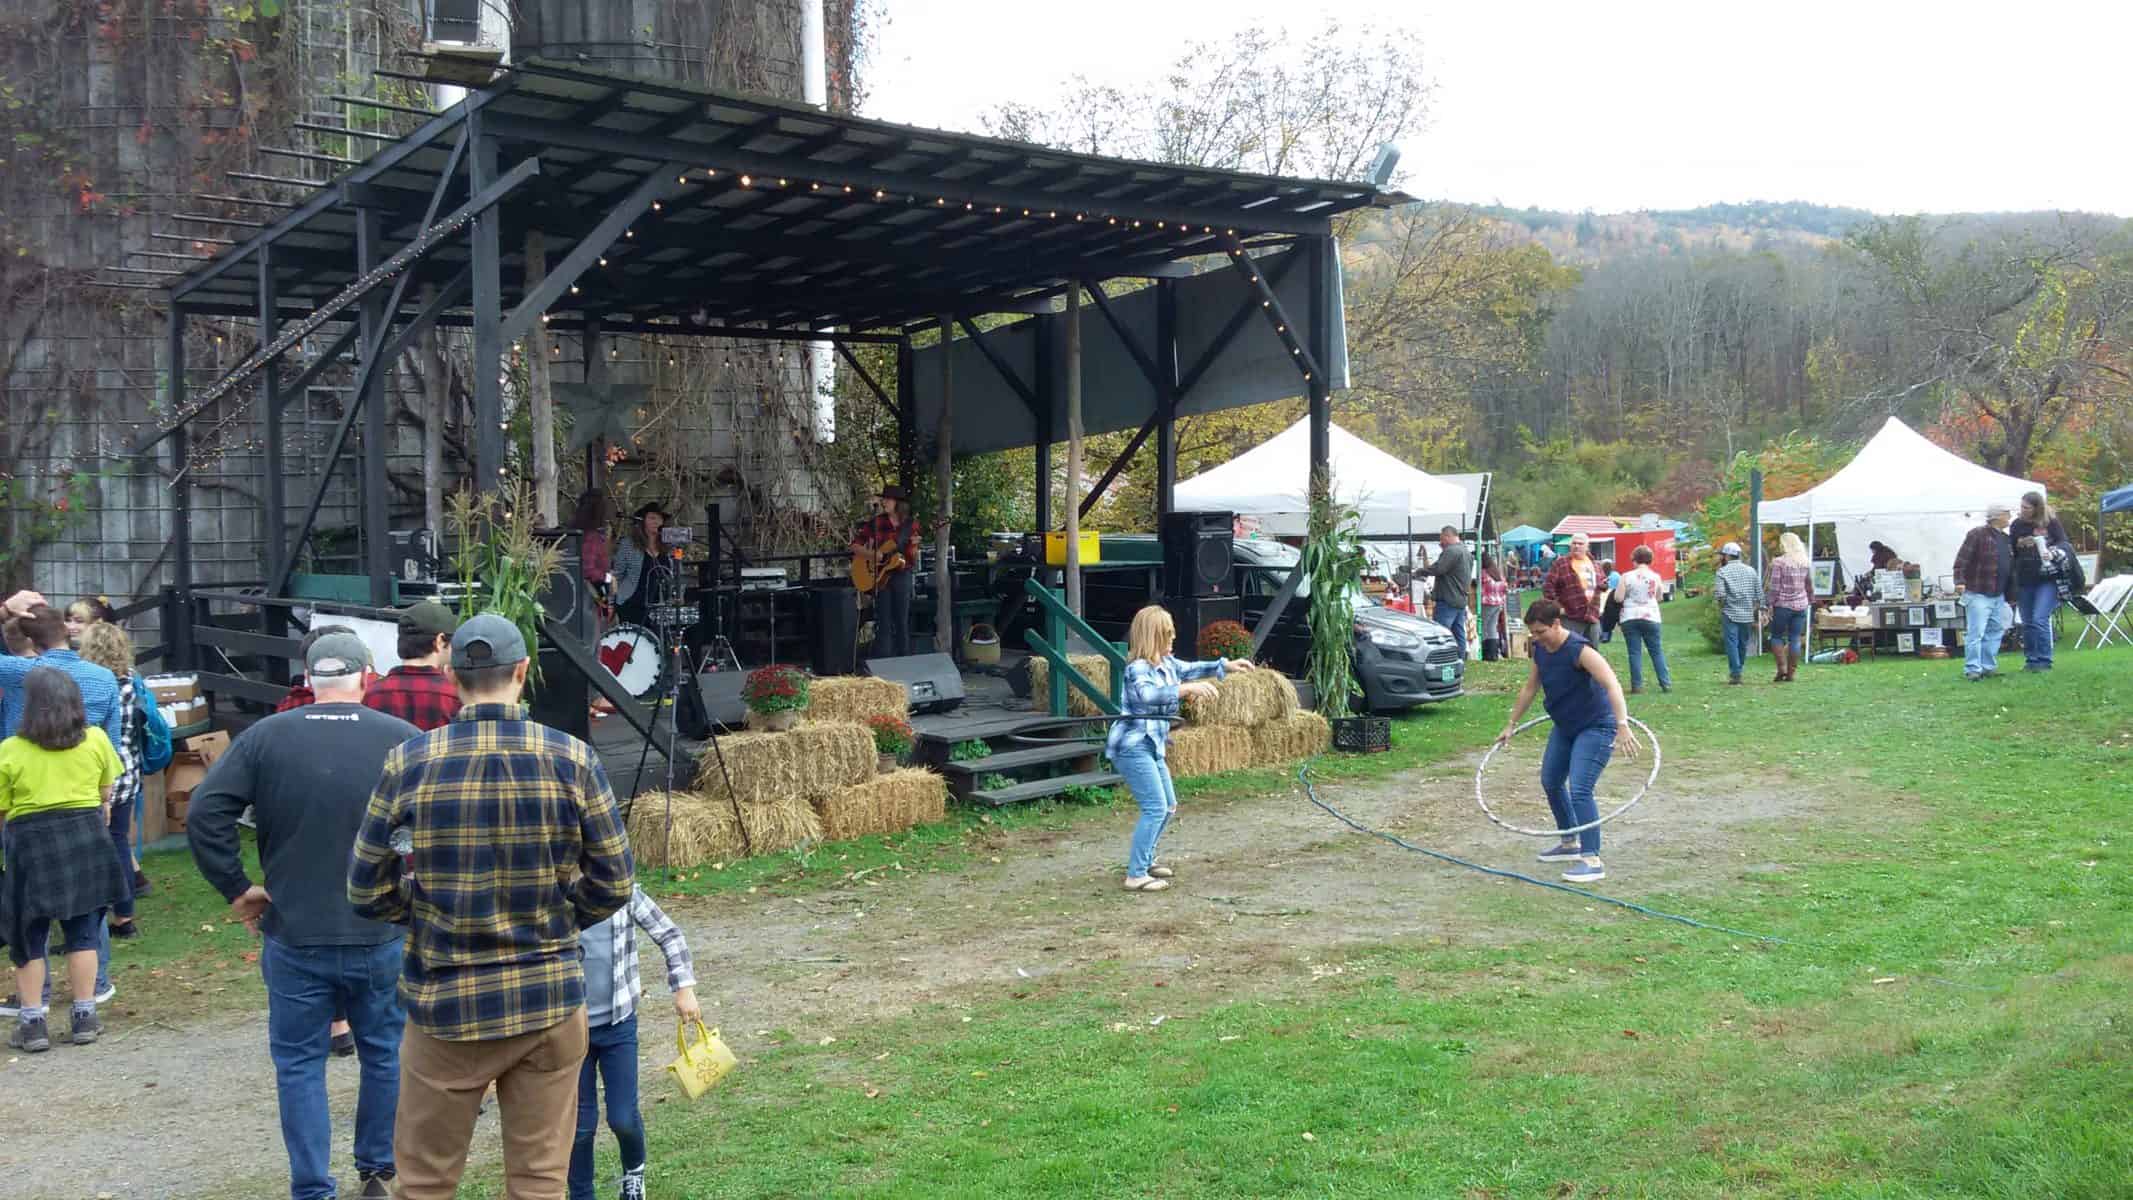 Southern Vermont Flannel Festival held at Rockingham Hill Farm